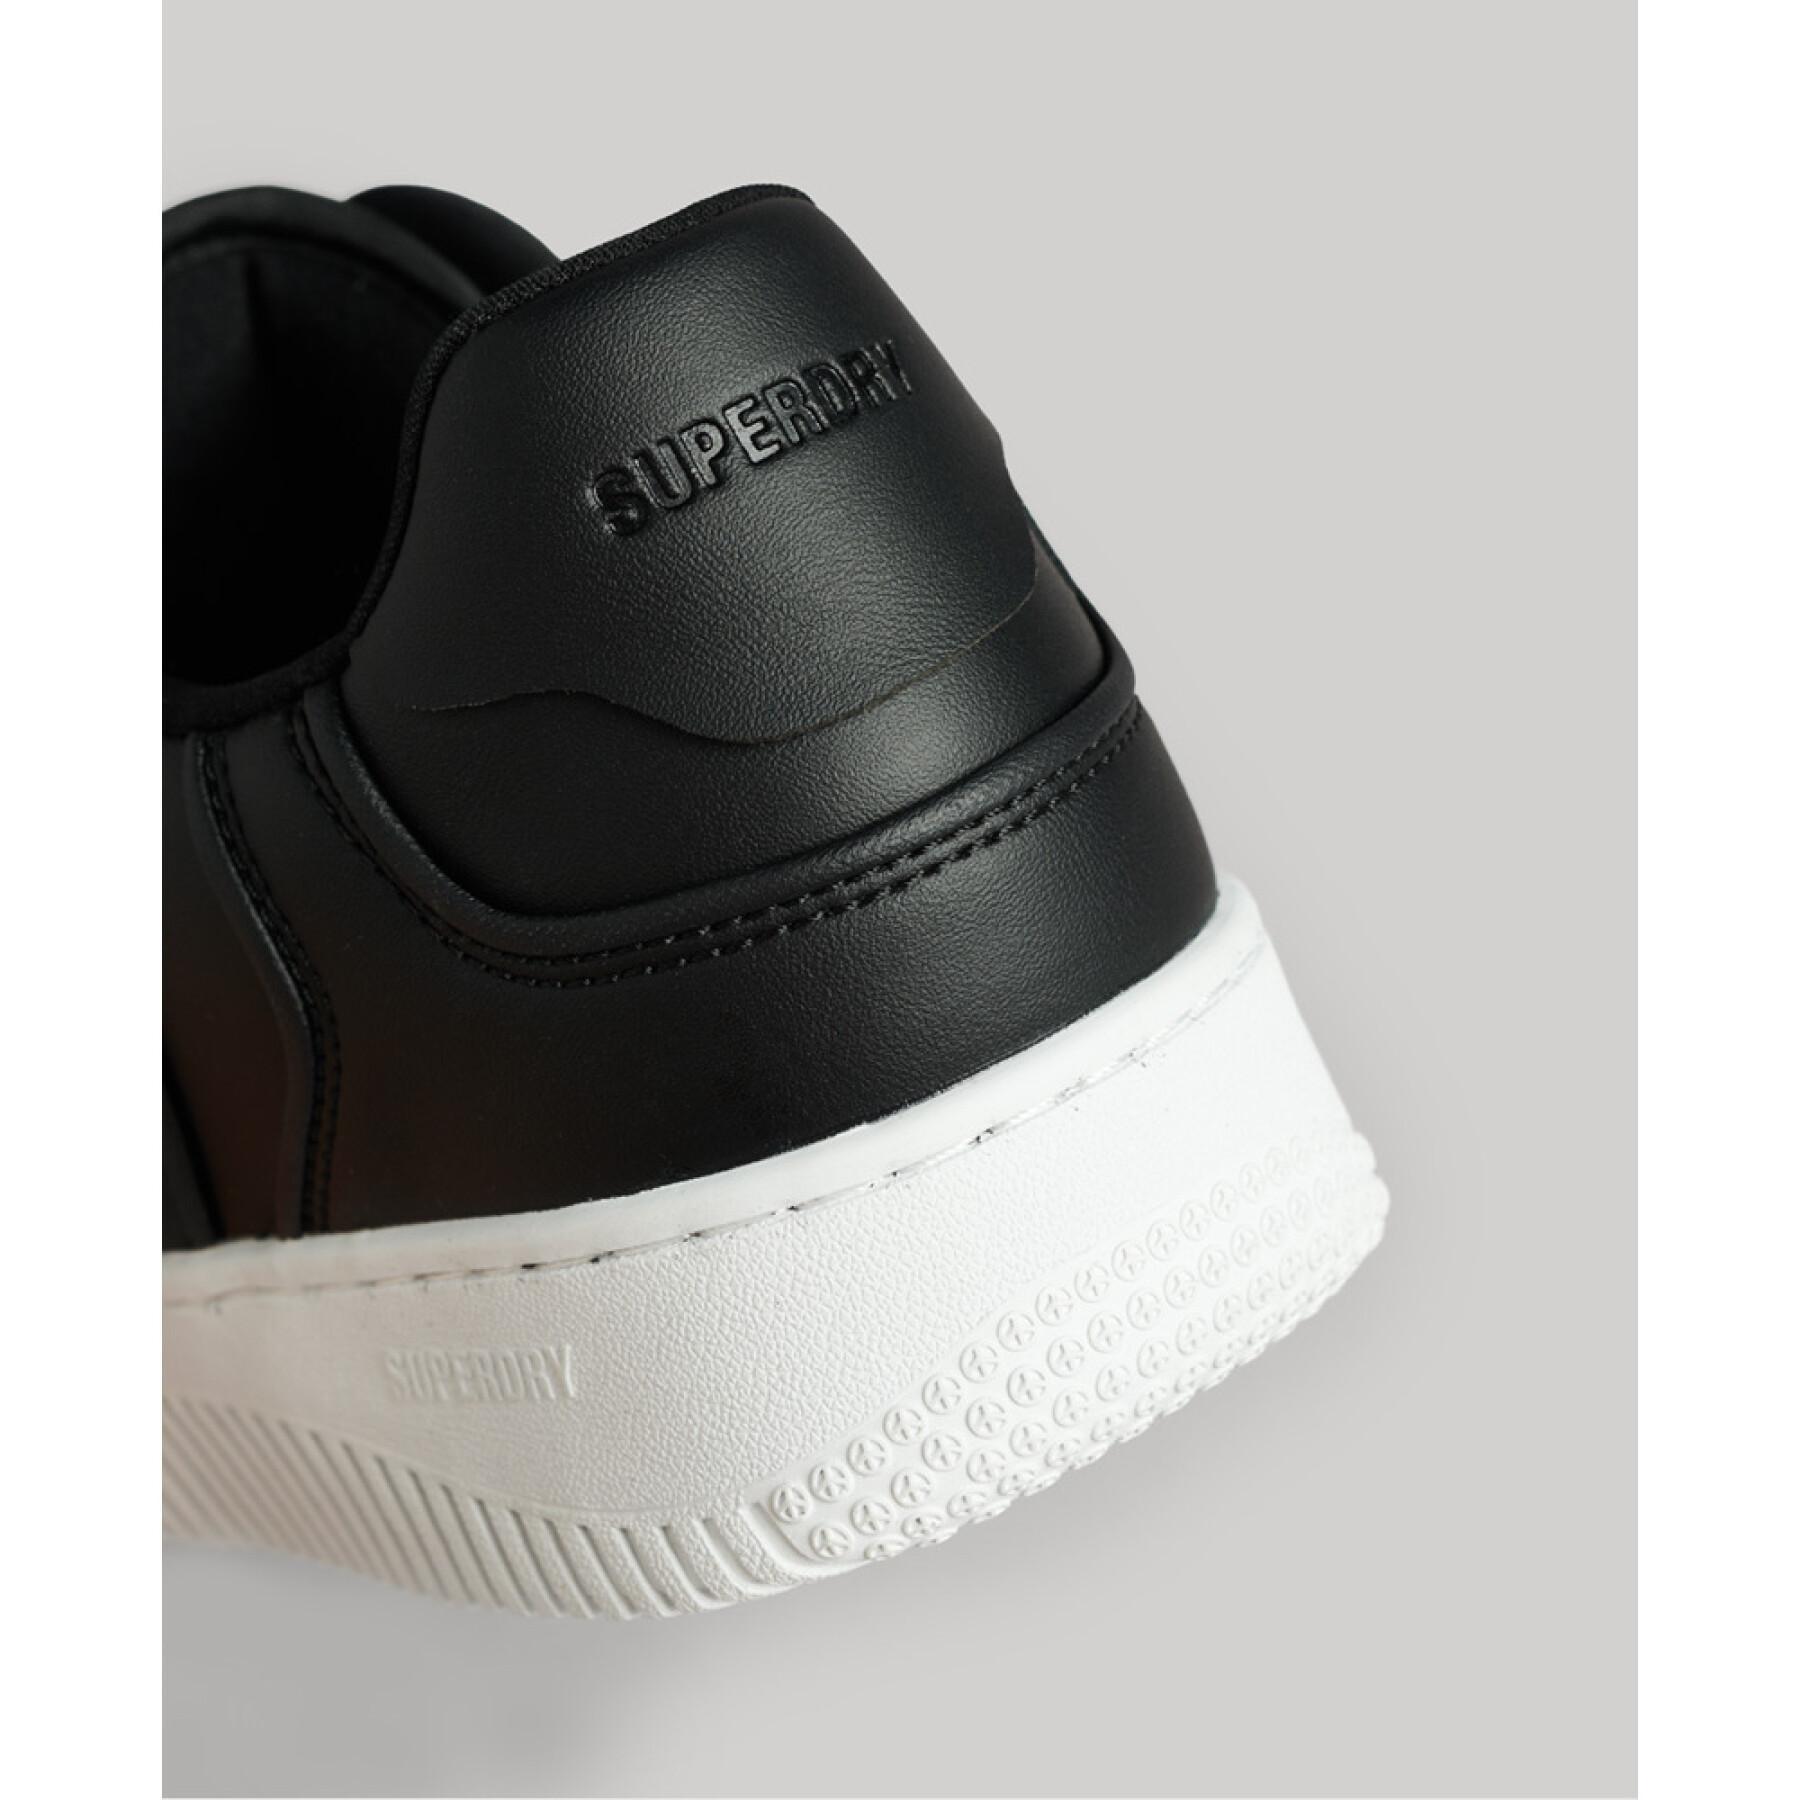 Women's sneakers Superdry Chunky